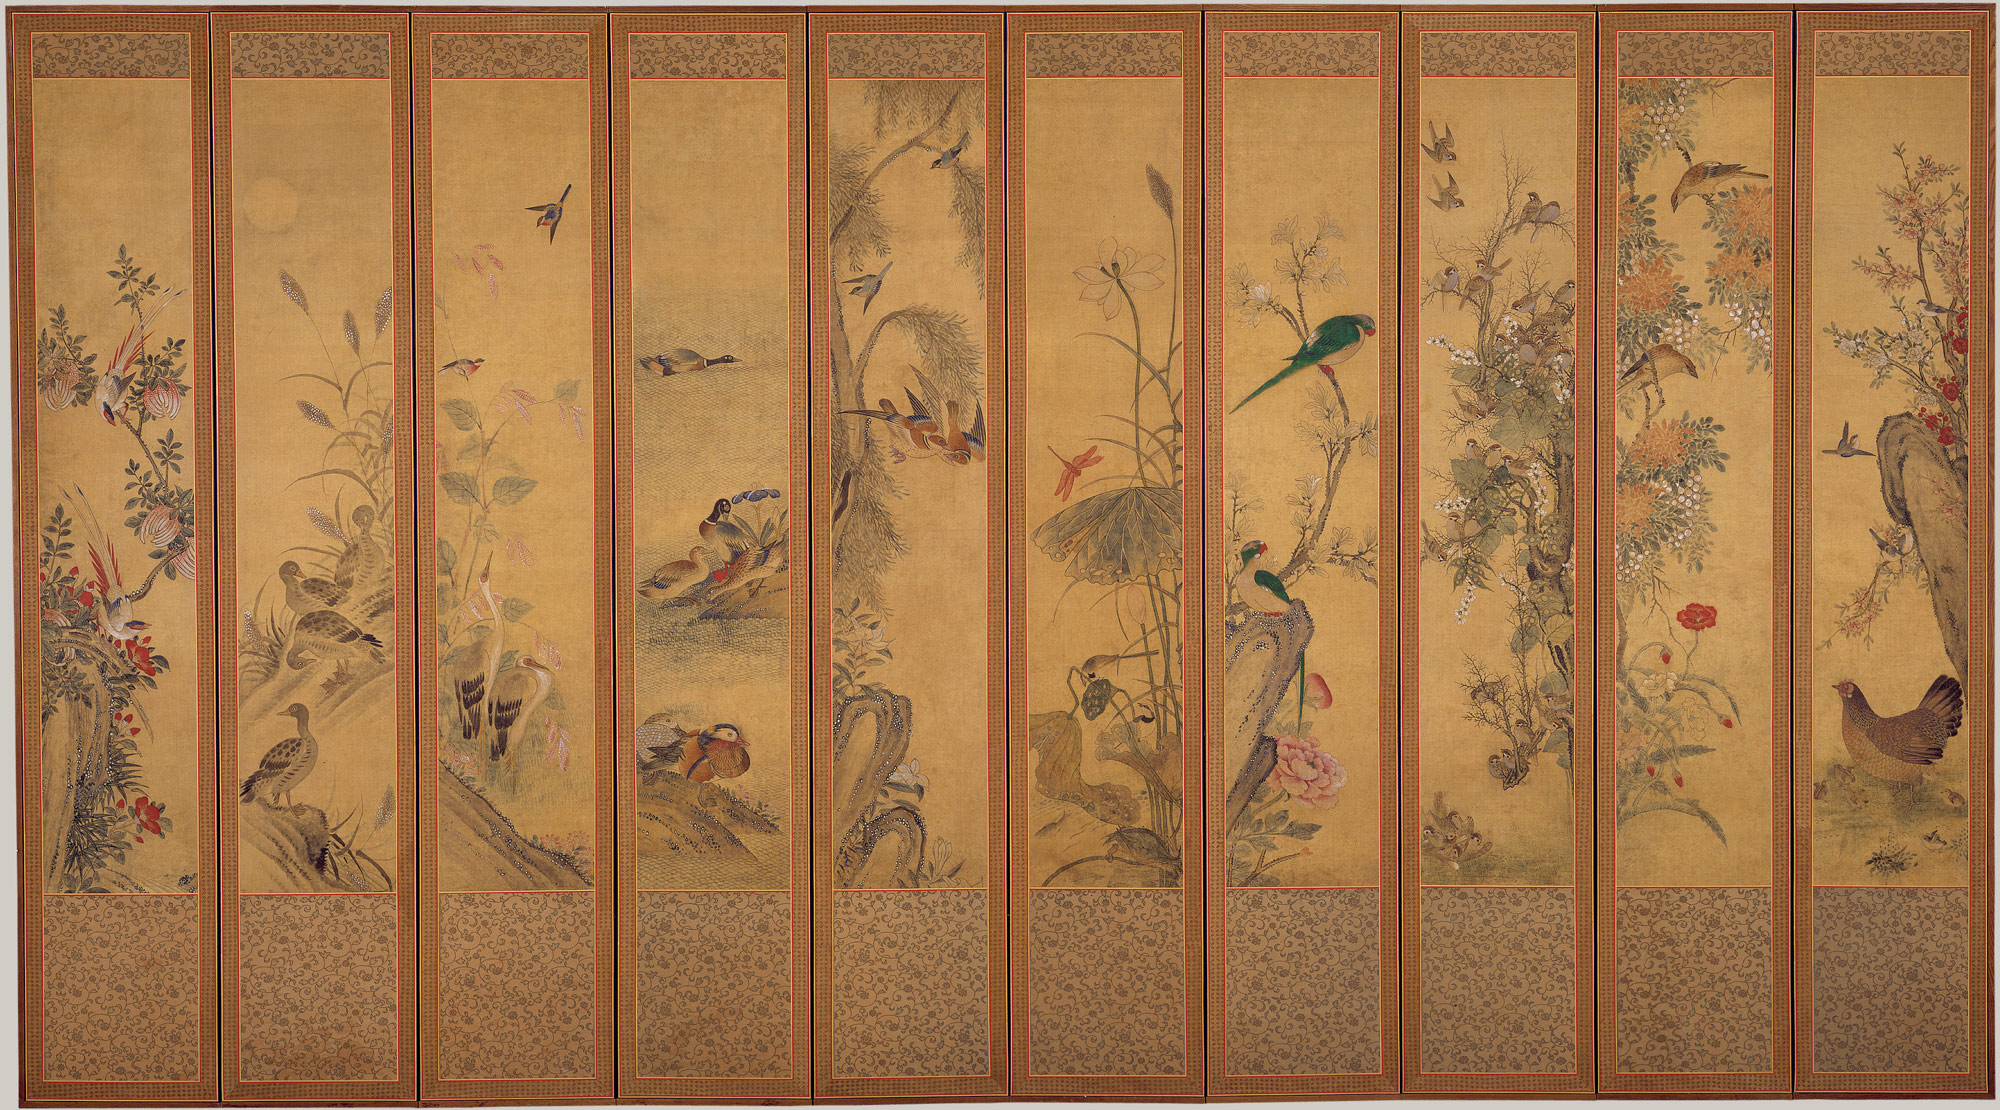 Working Title/Artist: Birds and Flowers Department: Asian Art Culture/Period/Location: HB/TOA Date Code: Working Date: 19th century photographed by mma in 1993, transparency 5 scanned by film & media 7/2/03 (phc)